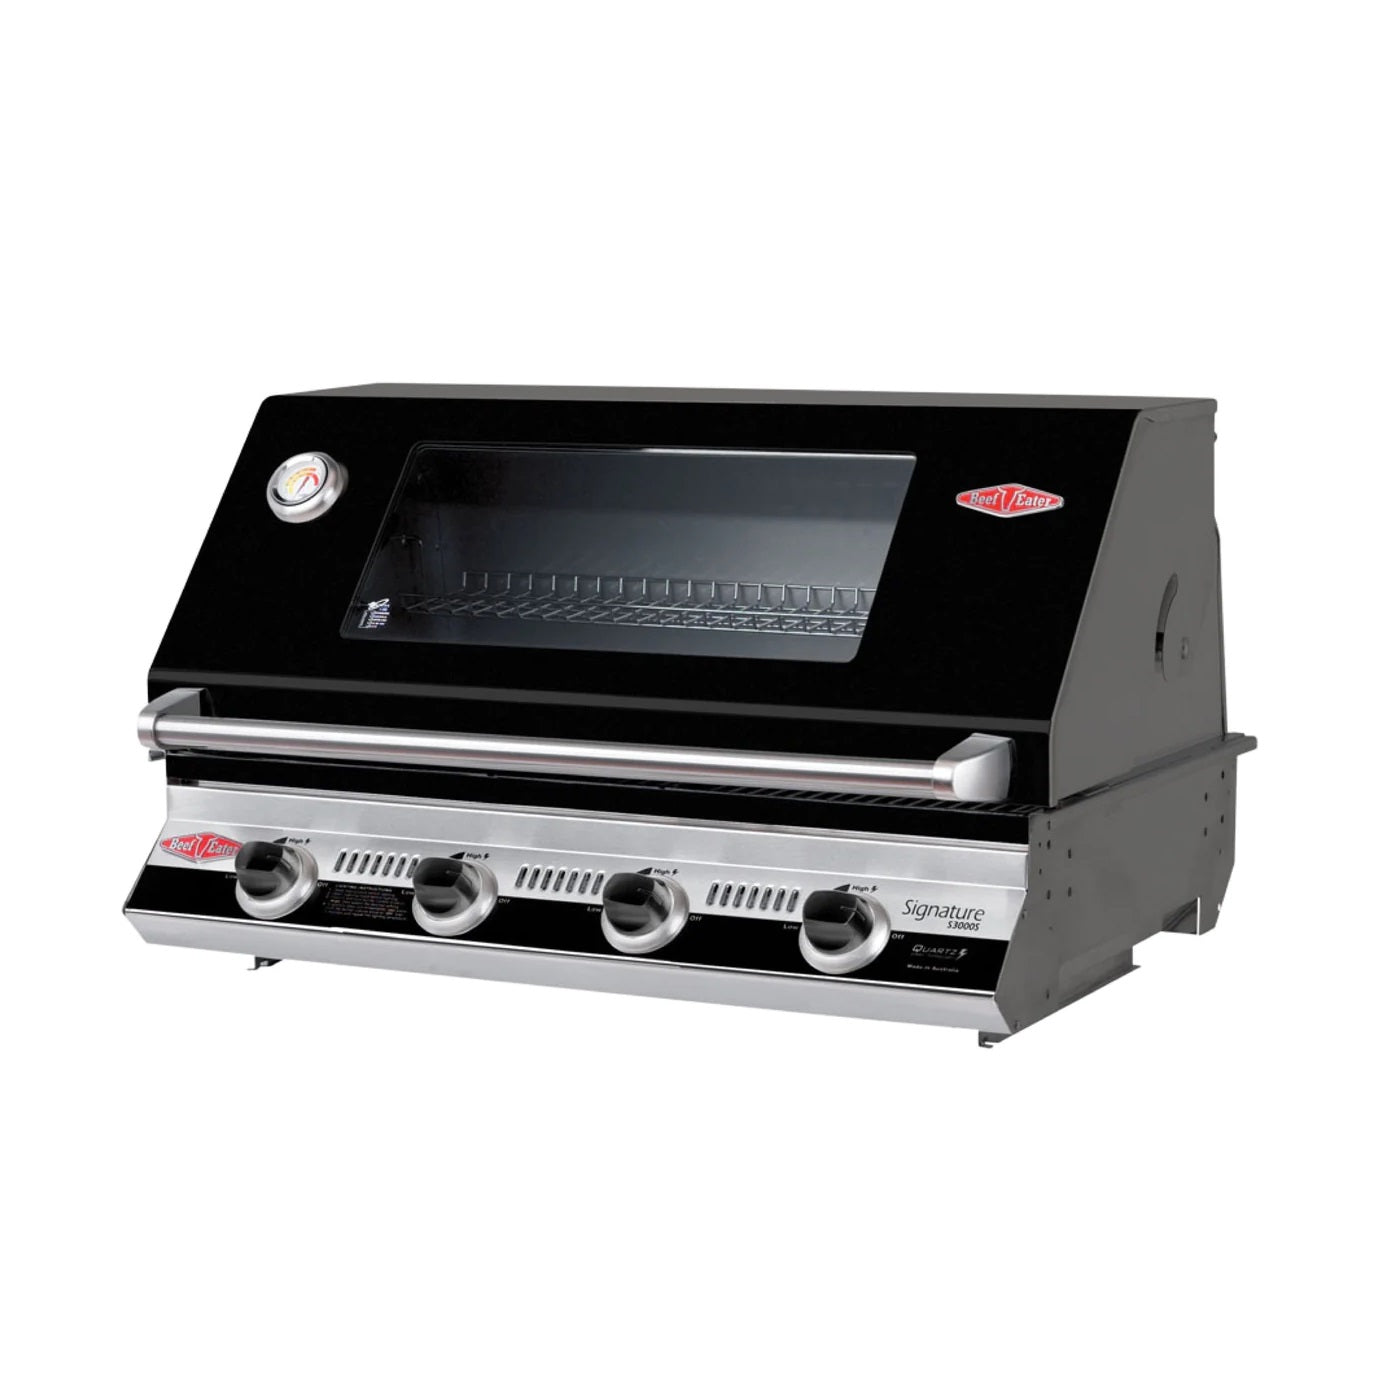 BeefEater S3000E Series - 4 Bnr BBQ Only